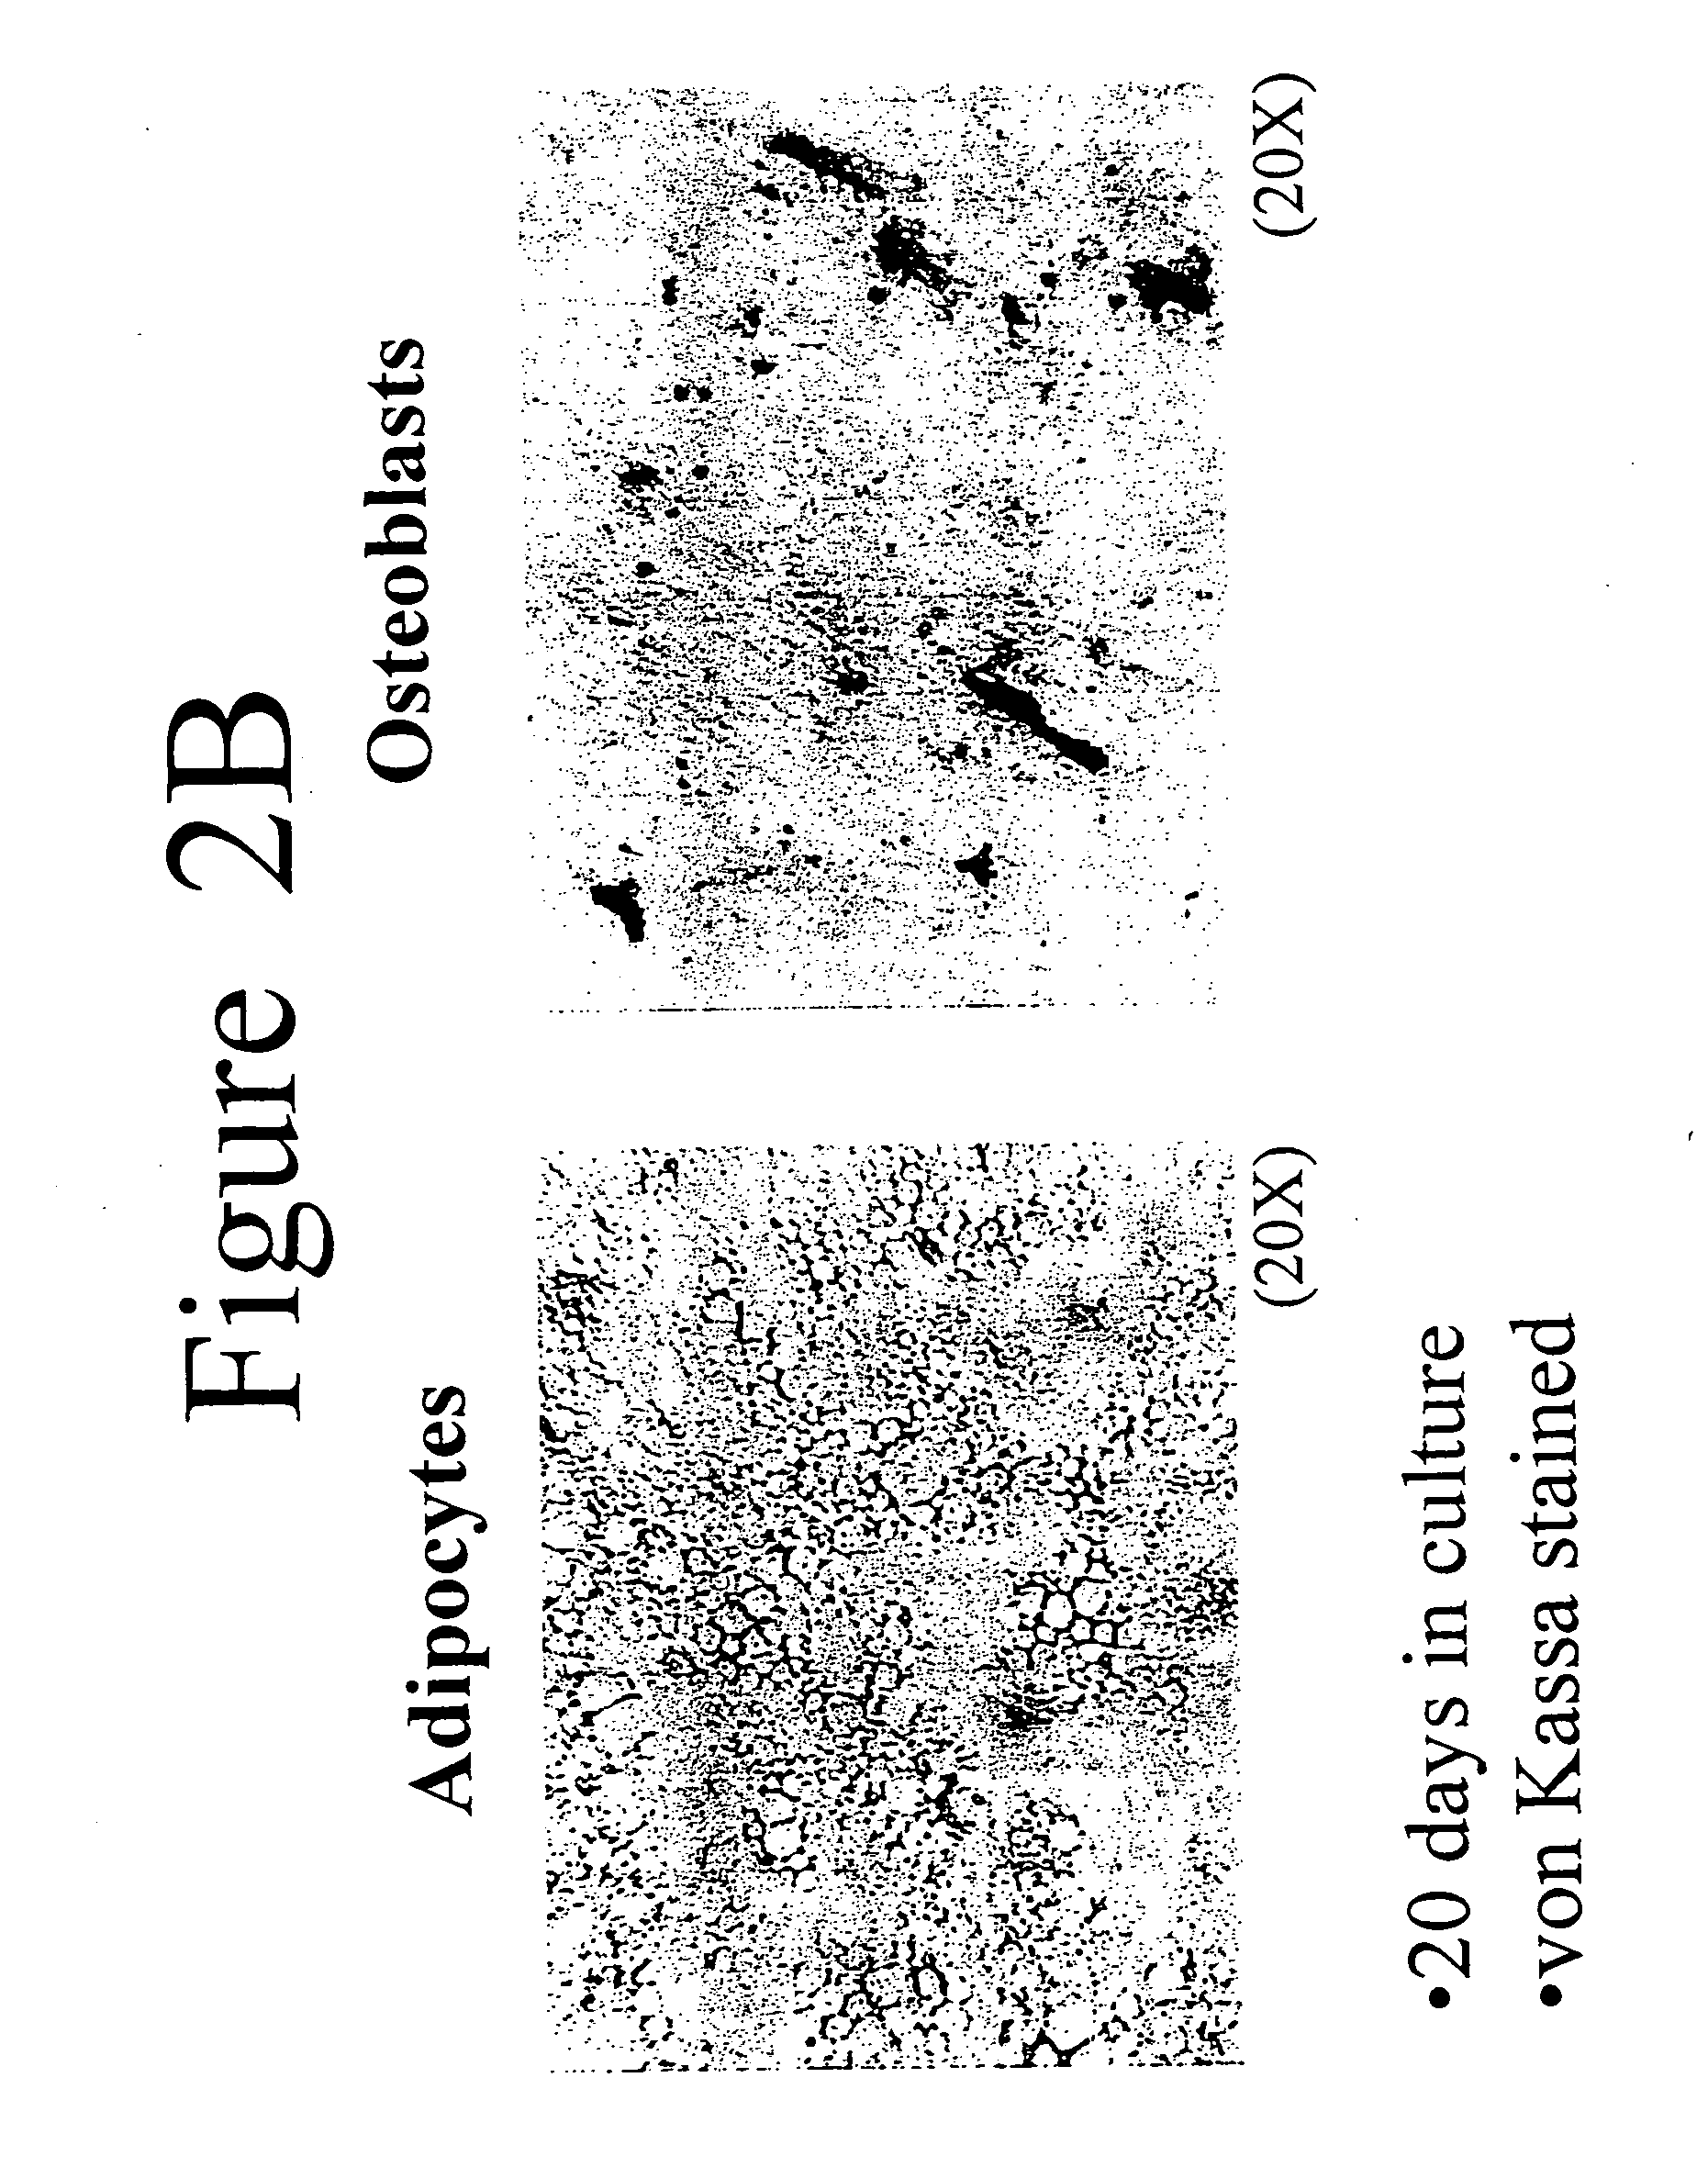 Differentiation of adipose stromal cells into osteoblasts and uses thereof